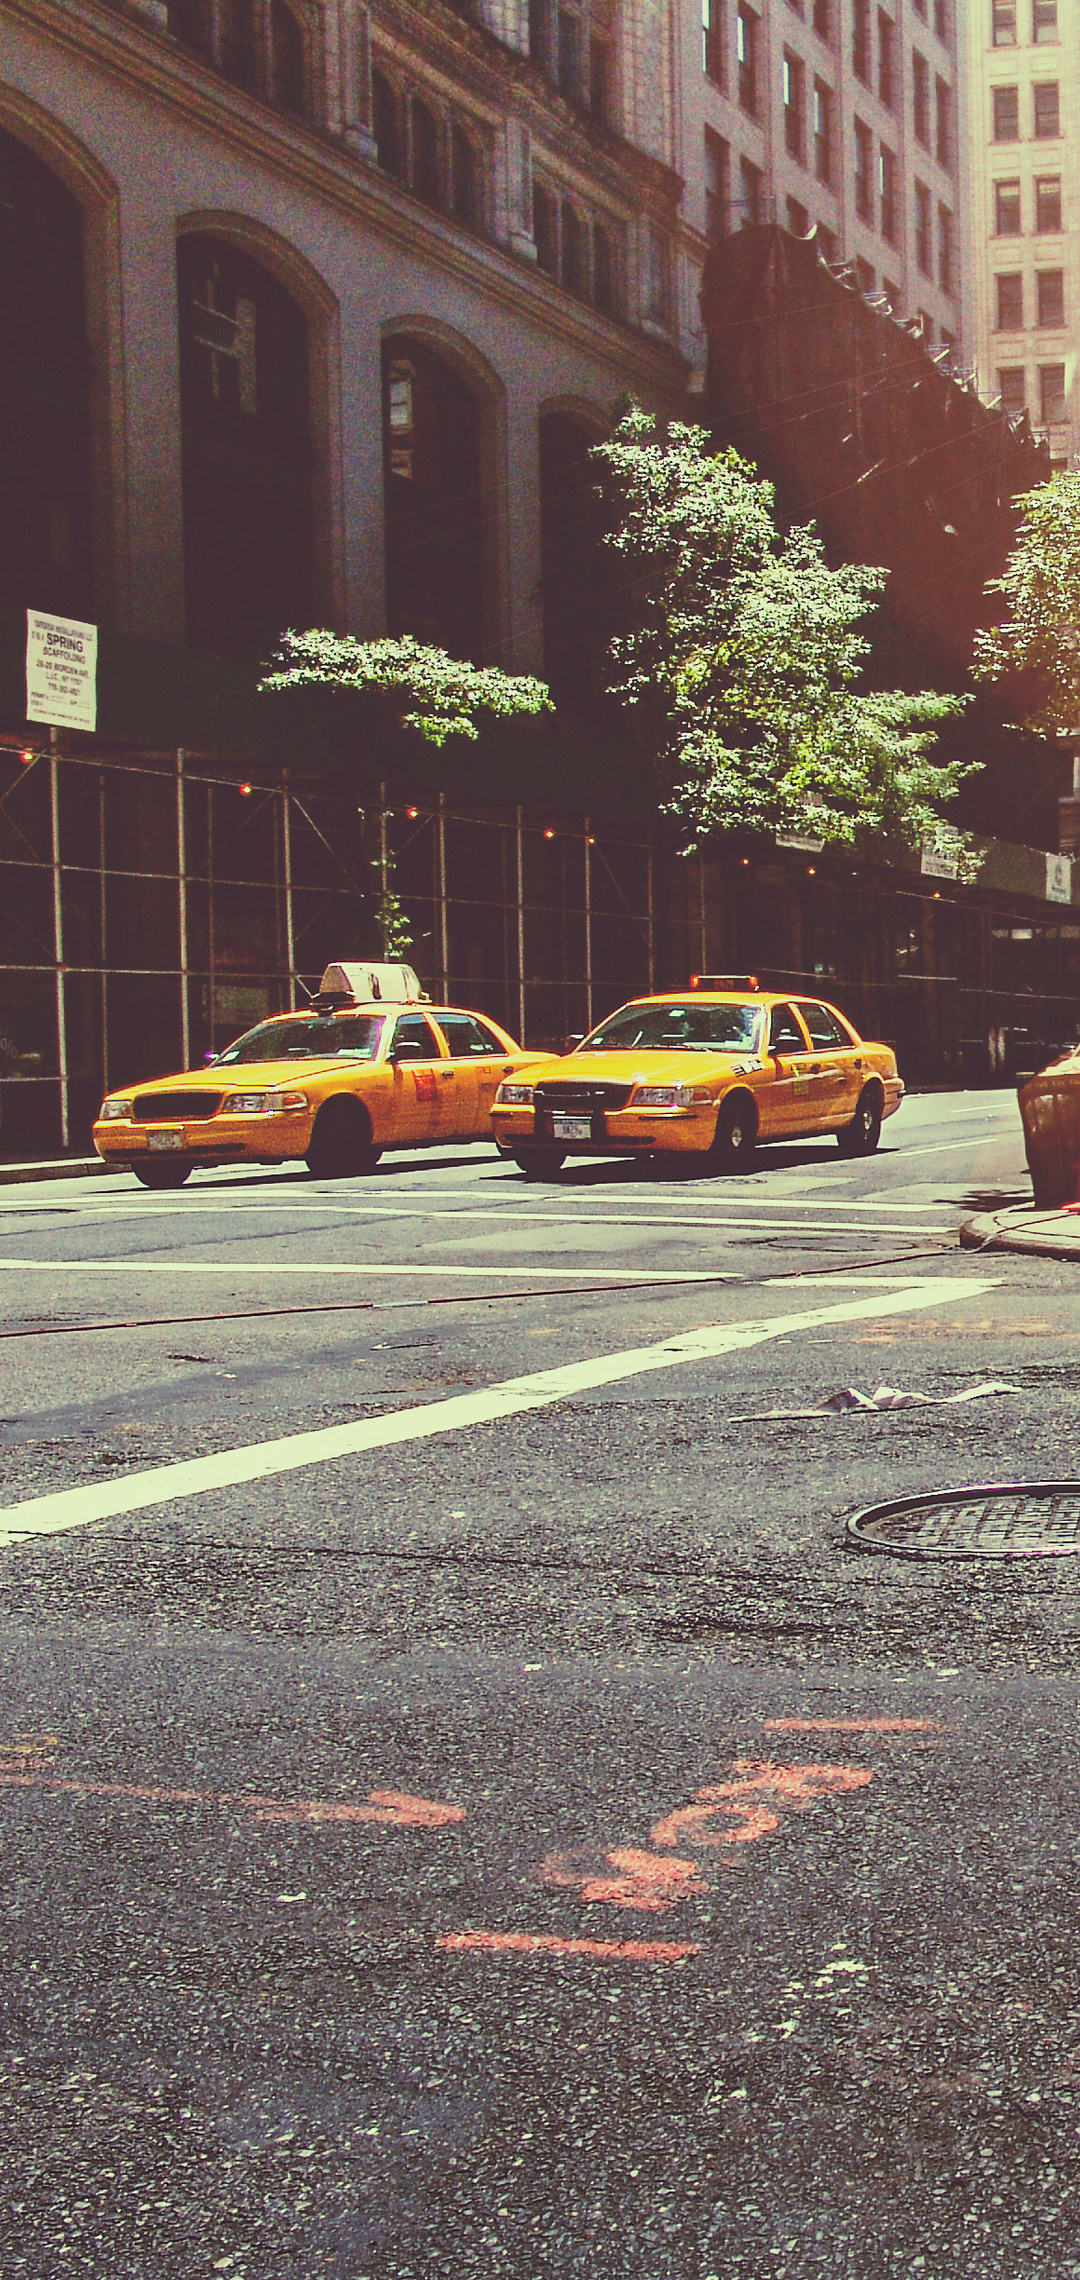 Taxi: Taxicab, A type of vehicle for hire with a driver, New York City. 1080x2280 HD Wallpaper.